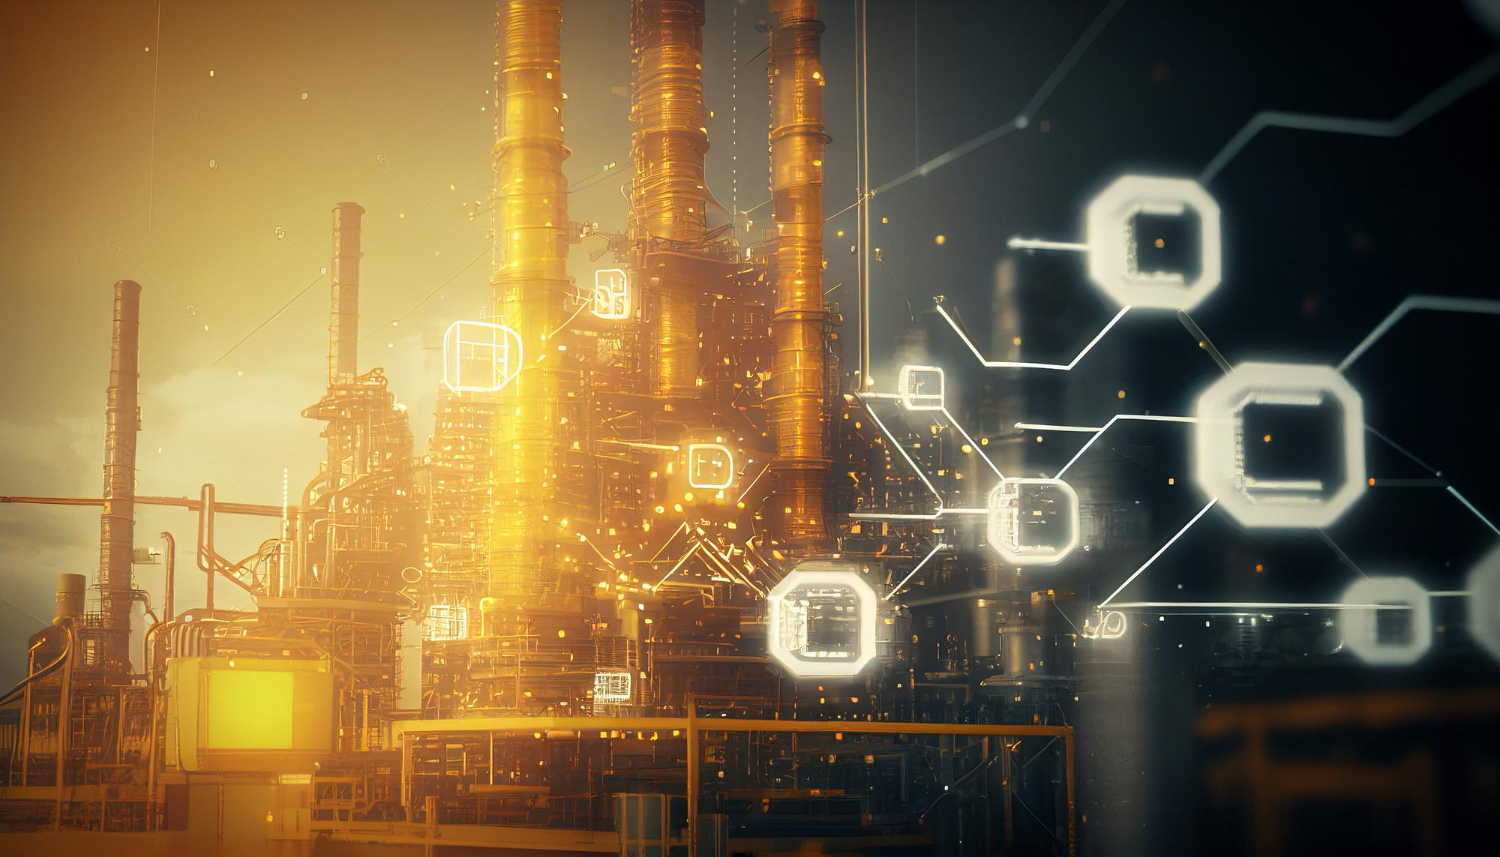 industry-40-energy-conservation-concept-energy-emblem-network-double-exposure-with-oil-refinery-business-plant